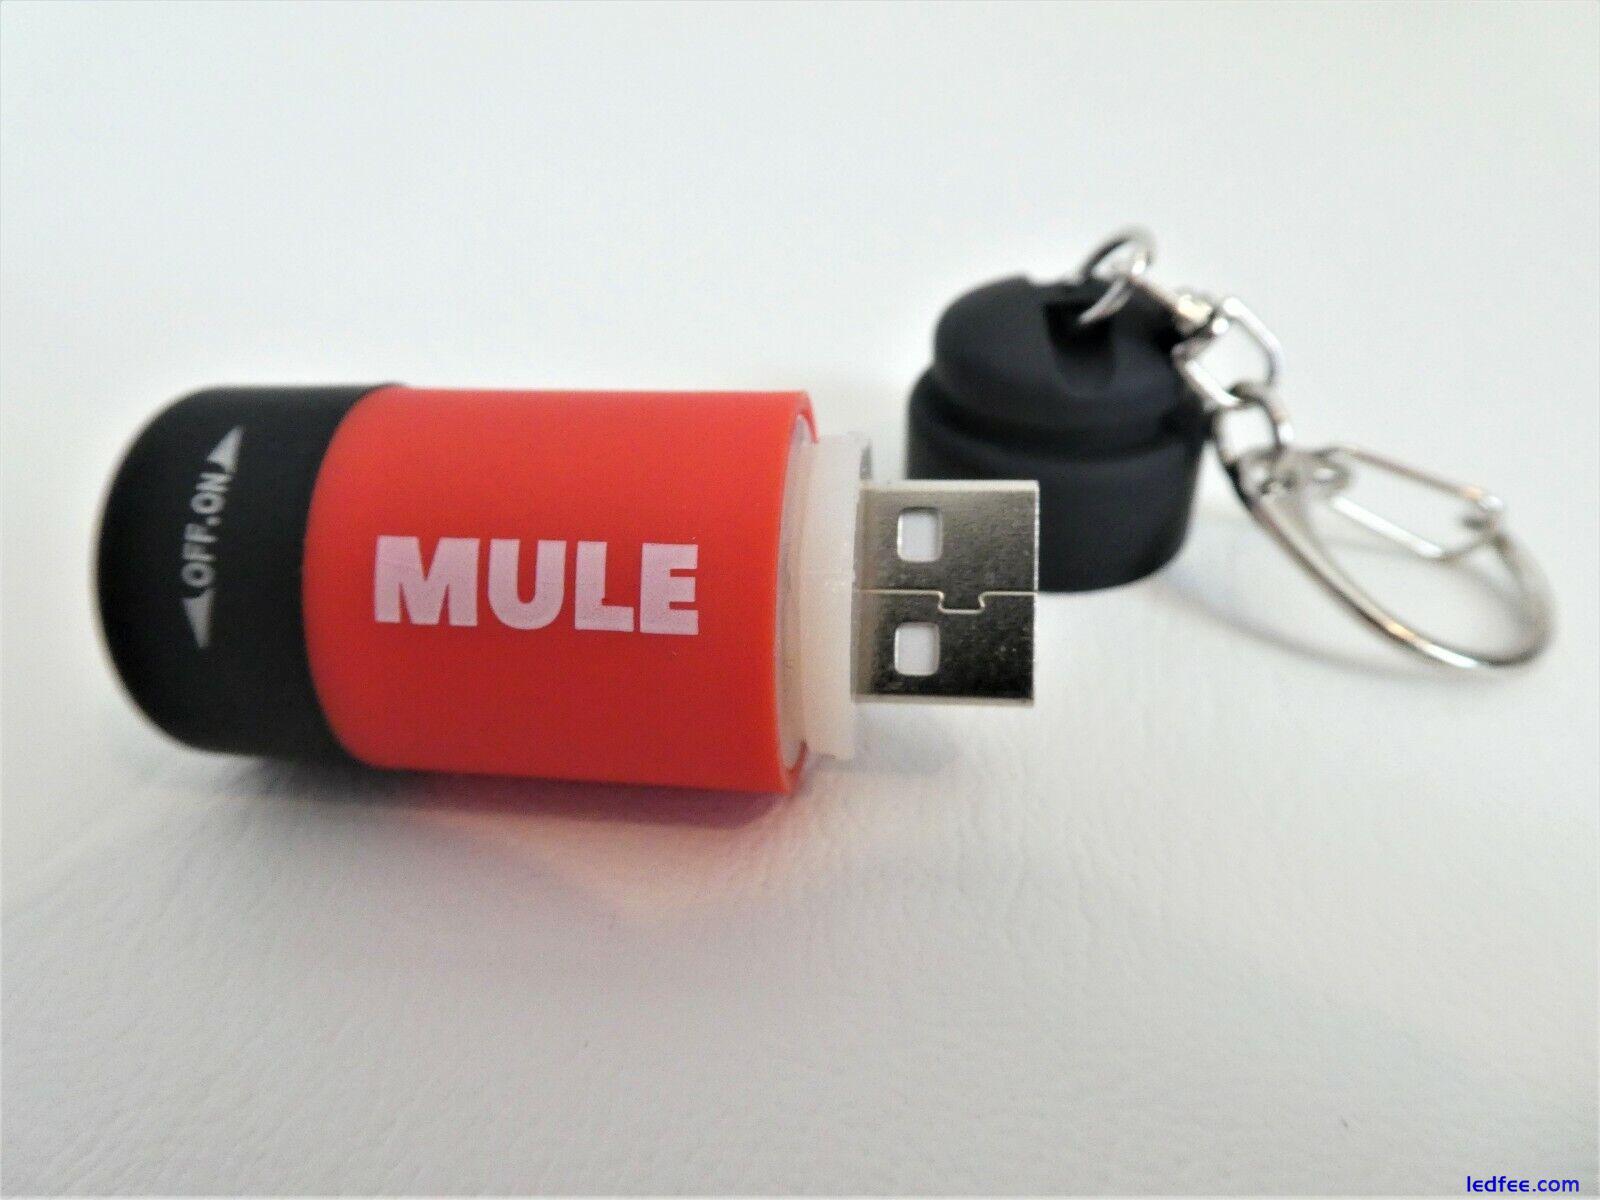 MULE RED USB Rechargeable water resistant inspection torch key-ring EDC 1 